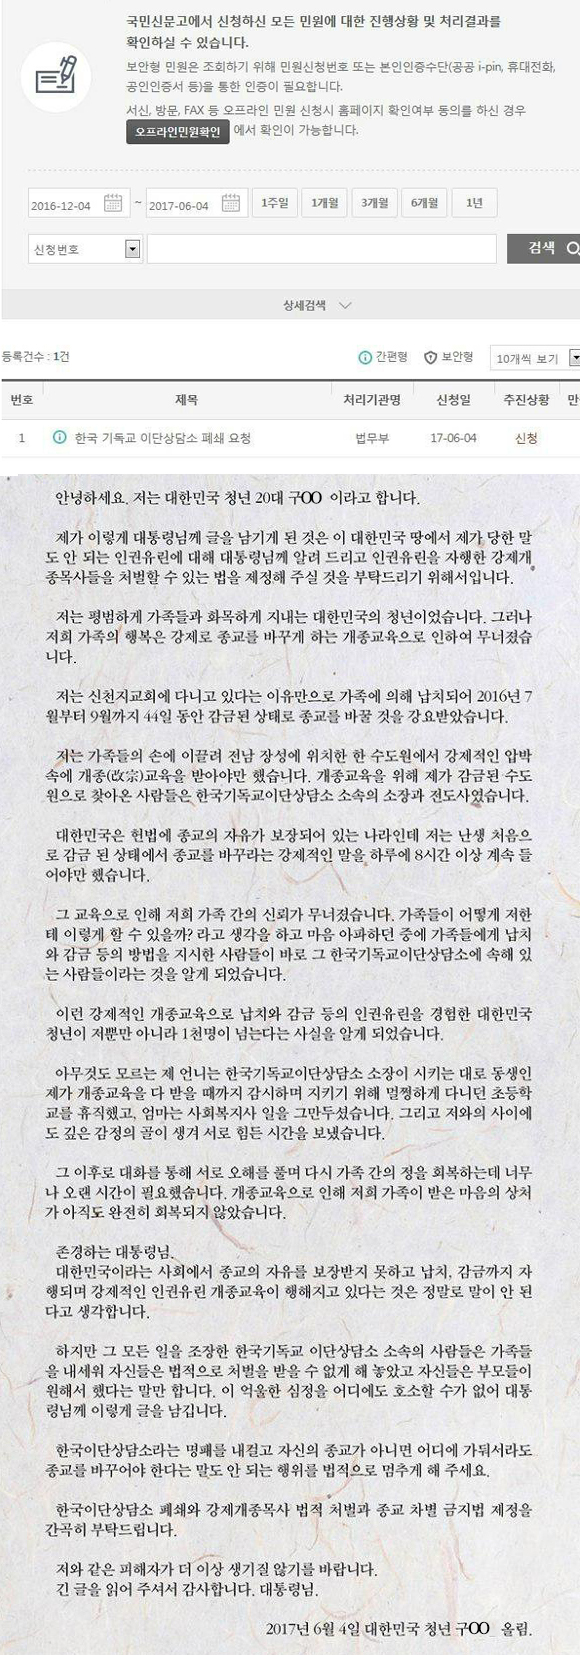 An actual petition appealing for “Closure of Counseling Center of Cult Religion ‧ Punishment of Coercive Conversion Education Pastors” in June 4, 2017 by the Deceased. This detail is accurate and is extremely reader-friendly in format. ⓒ천지일보(뉴스천지) 